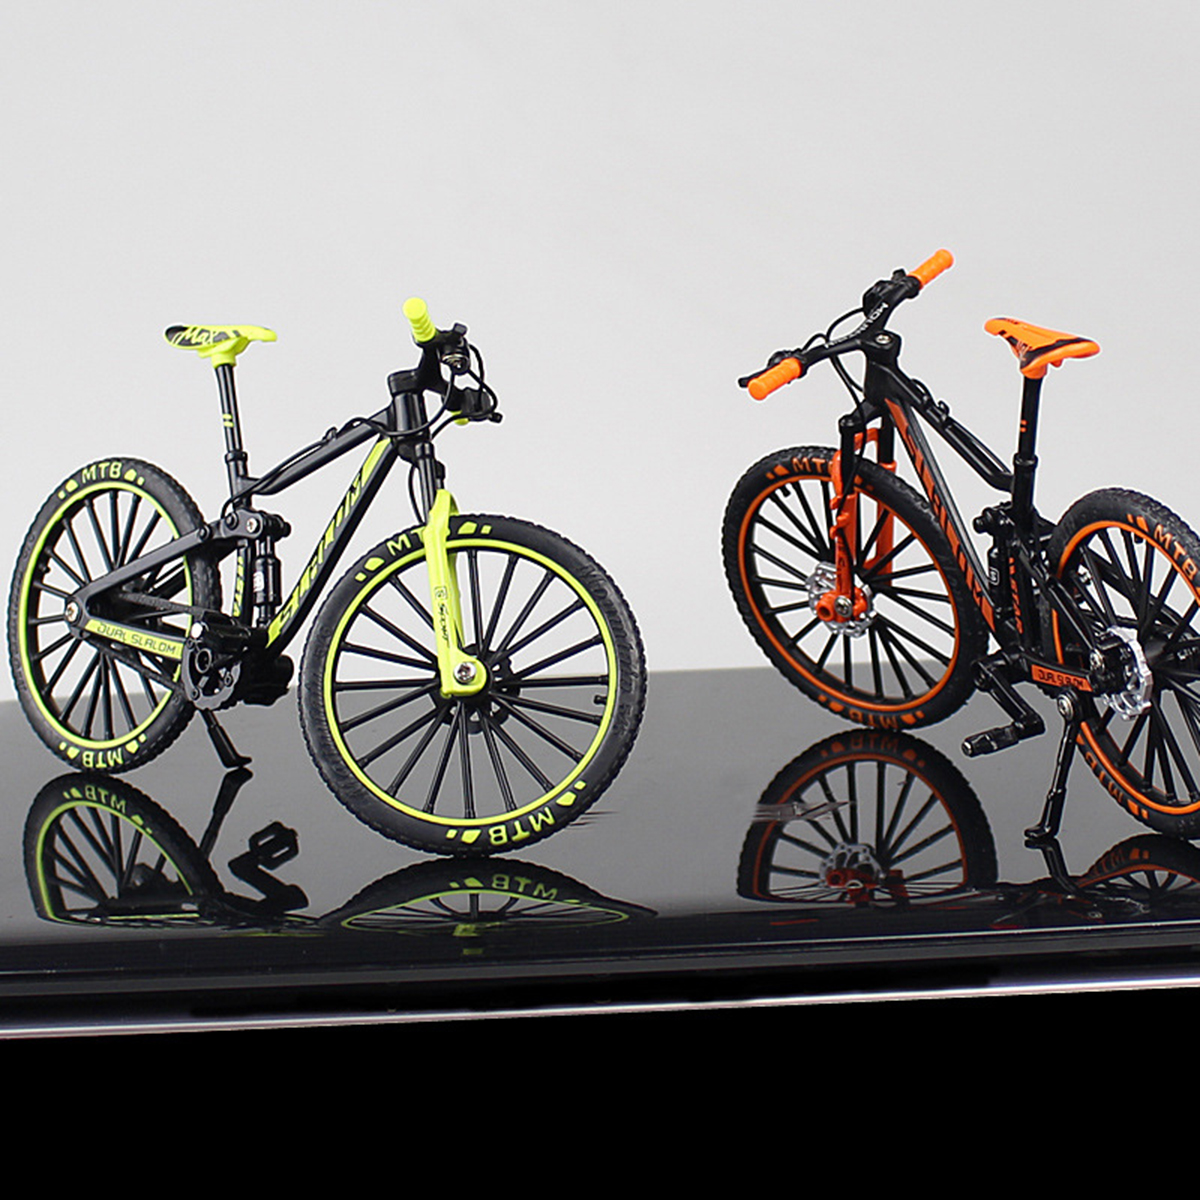 110-3D-Mini-Multi-color-Alloy-Mountain-Racing-Bicycle-Rotatable-Wheel-Diecast-Model-Toy-for-Decorati-1704789-8